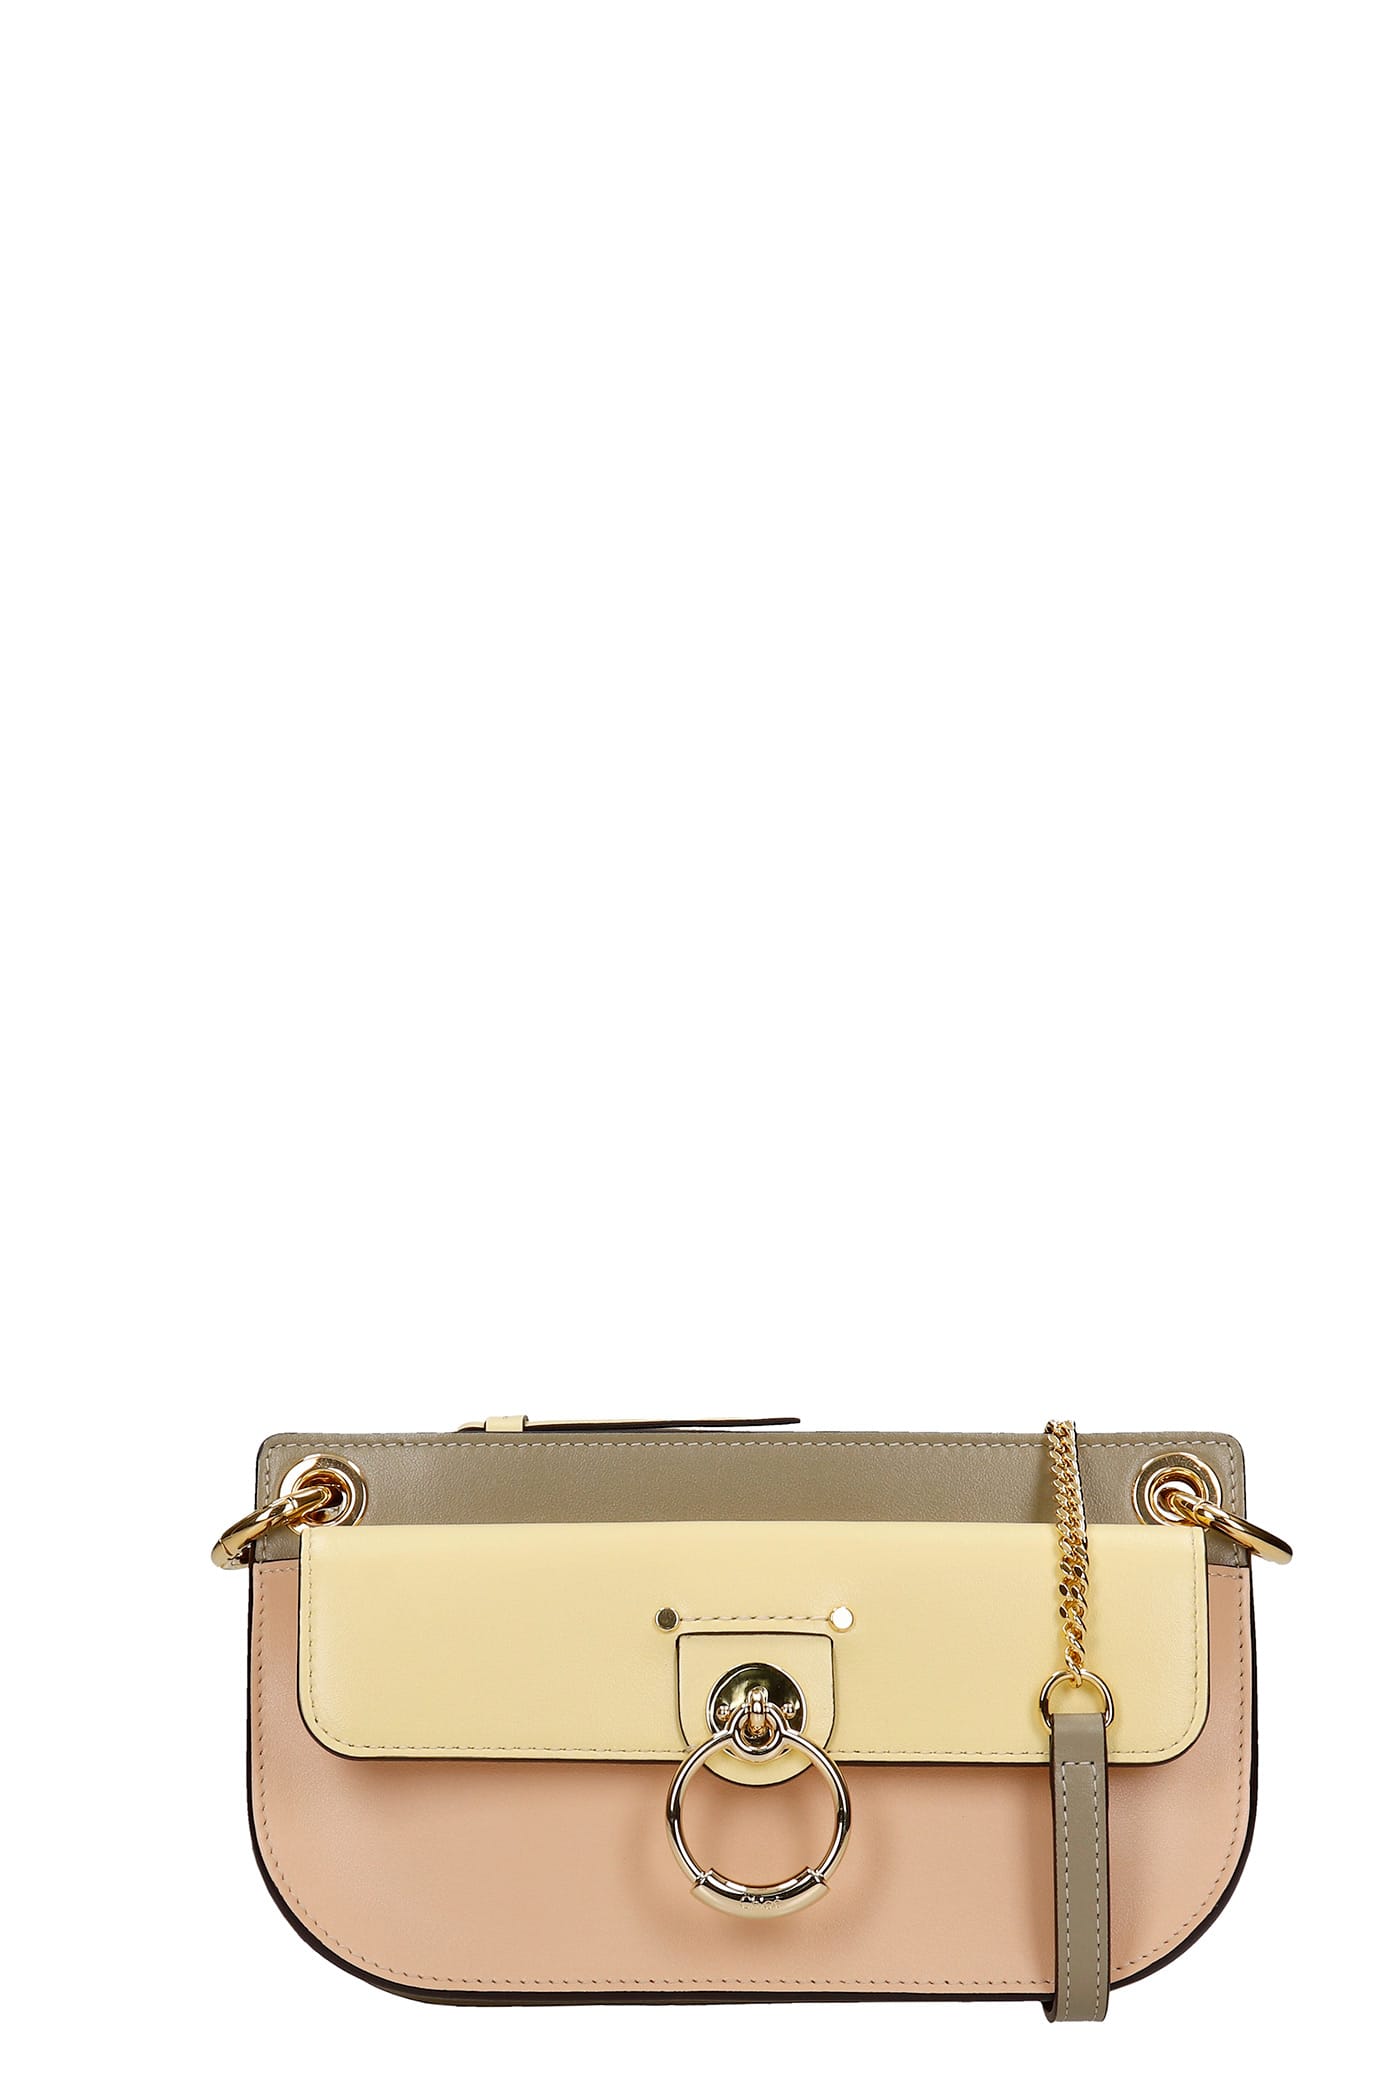 Chloé Tess Clutch In Gold Leather